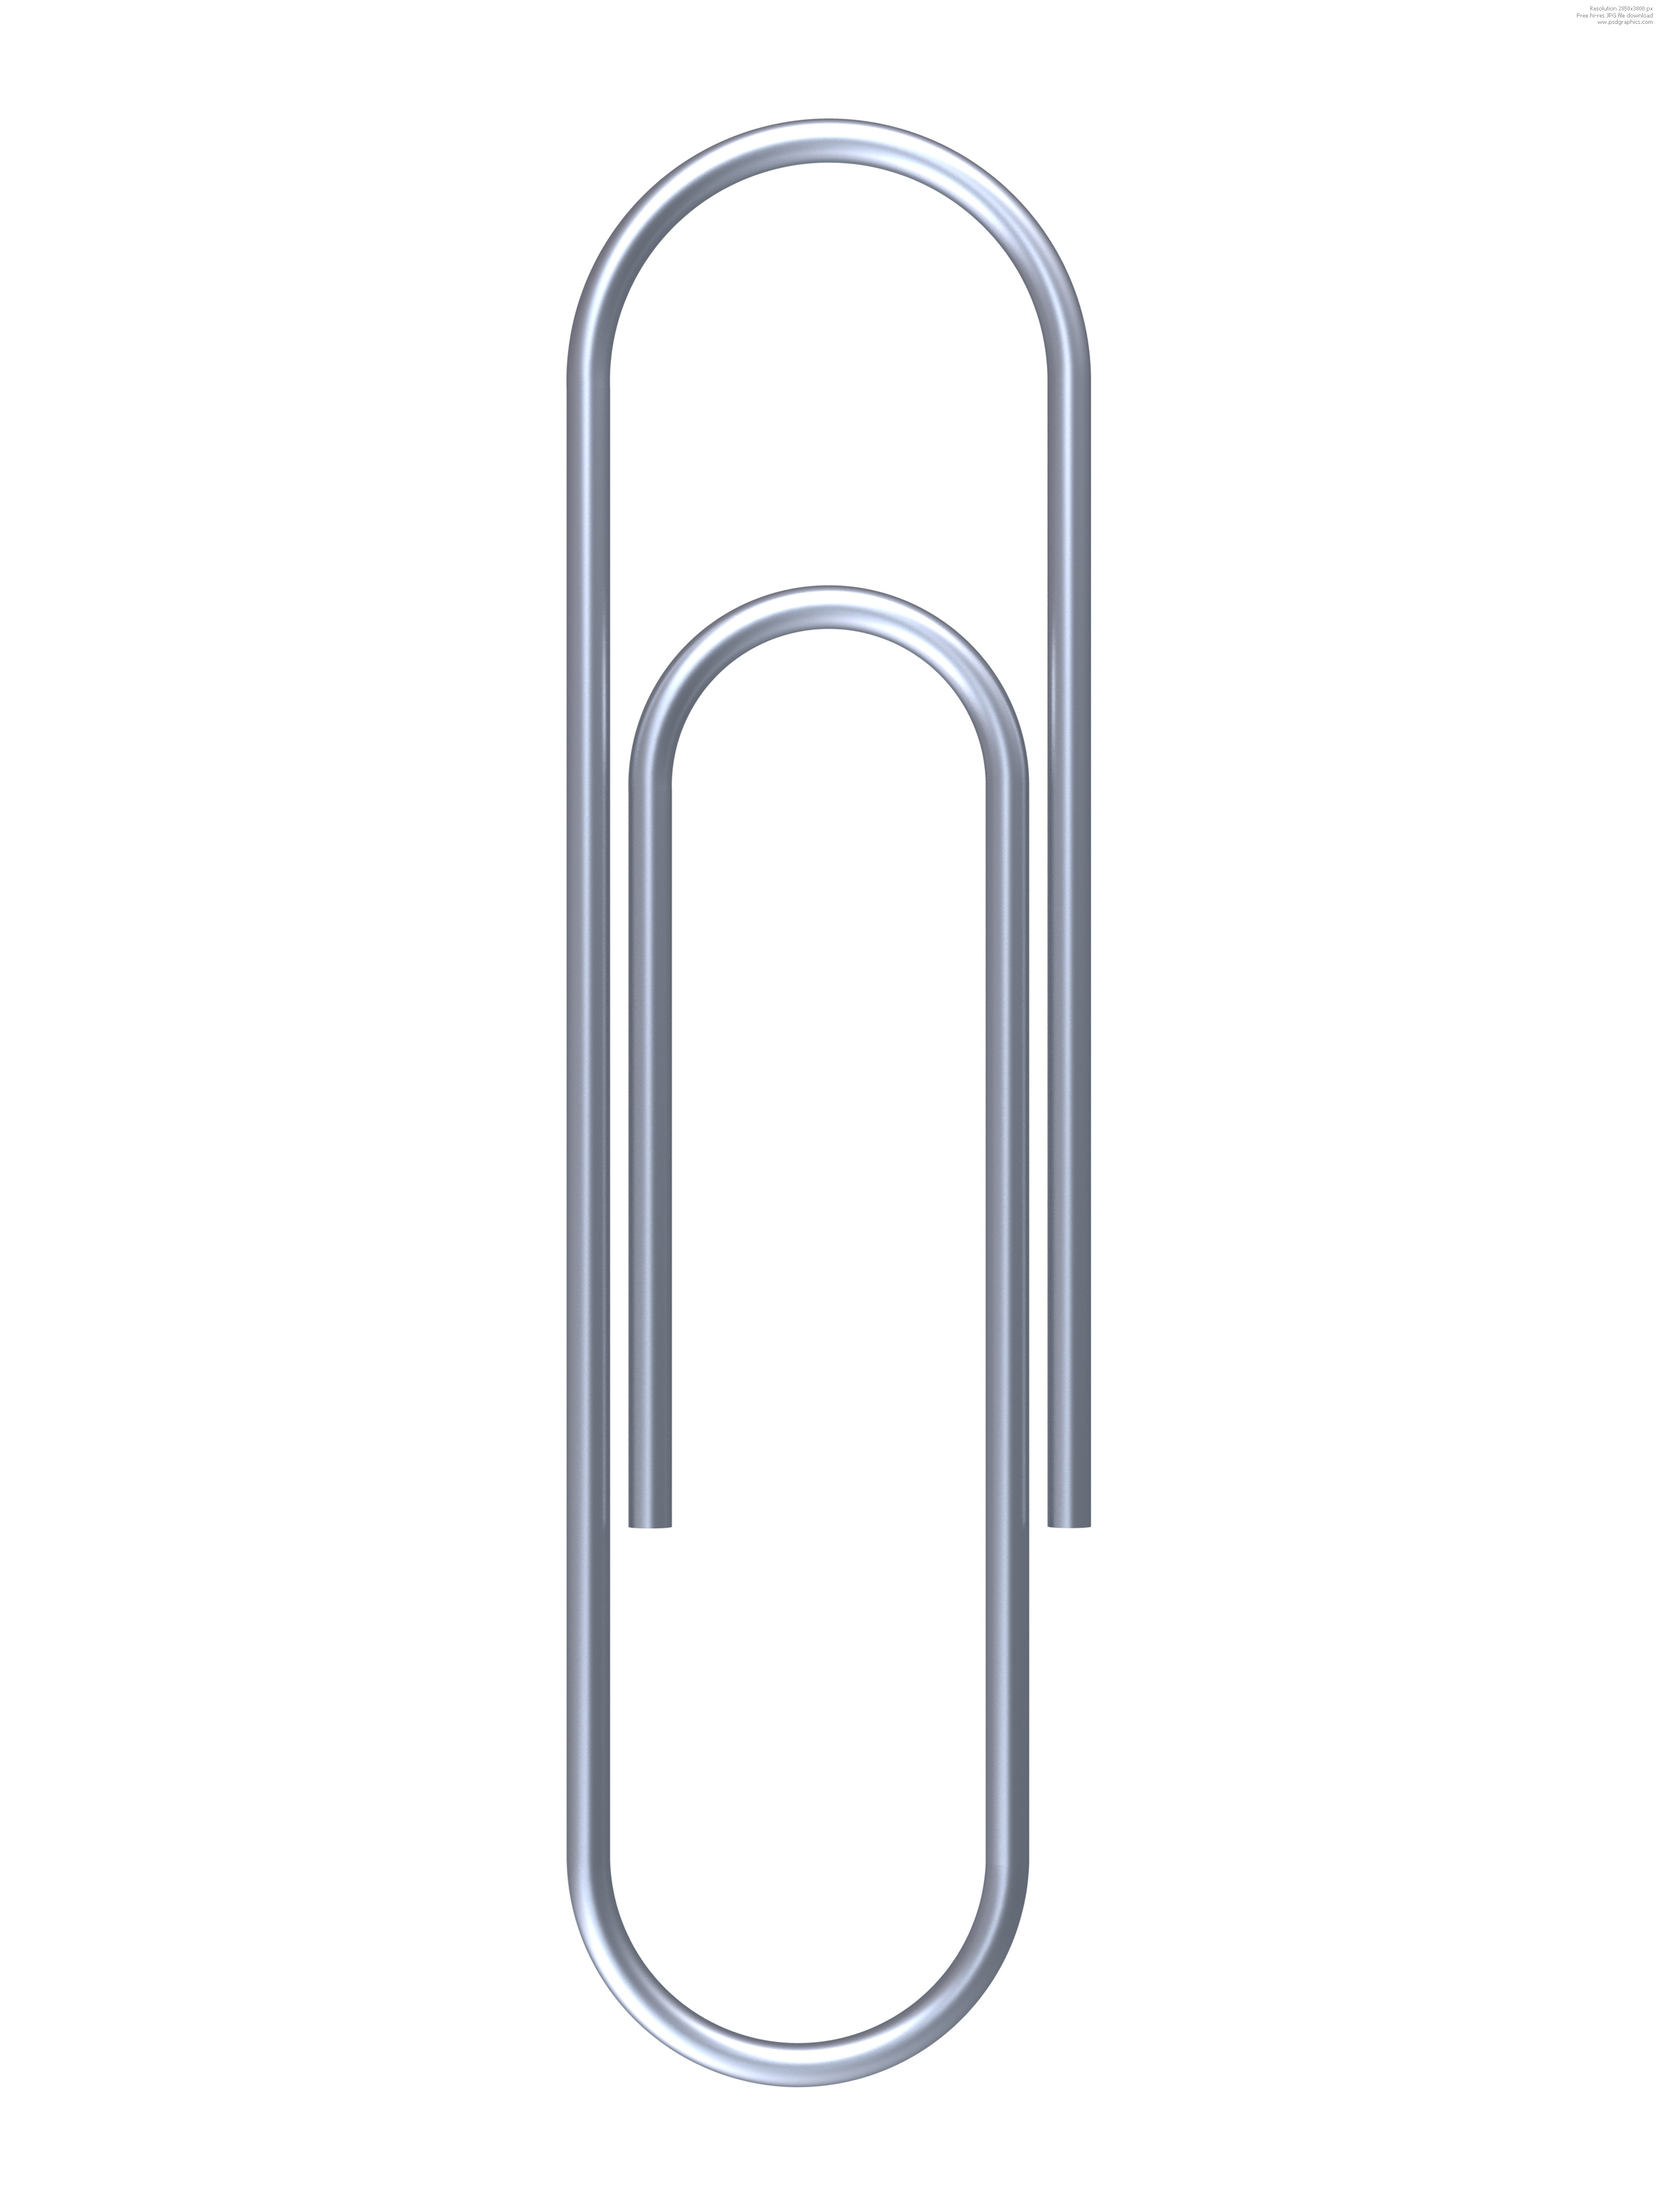 A Shout-out to the Paper Clip. - brokaw